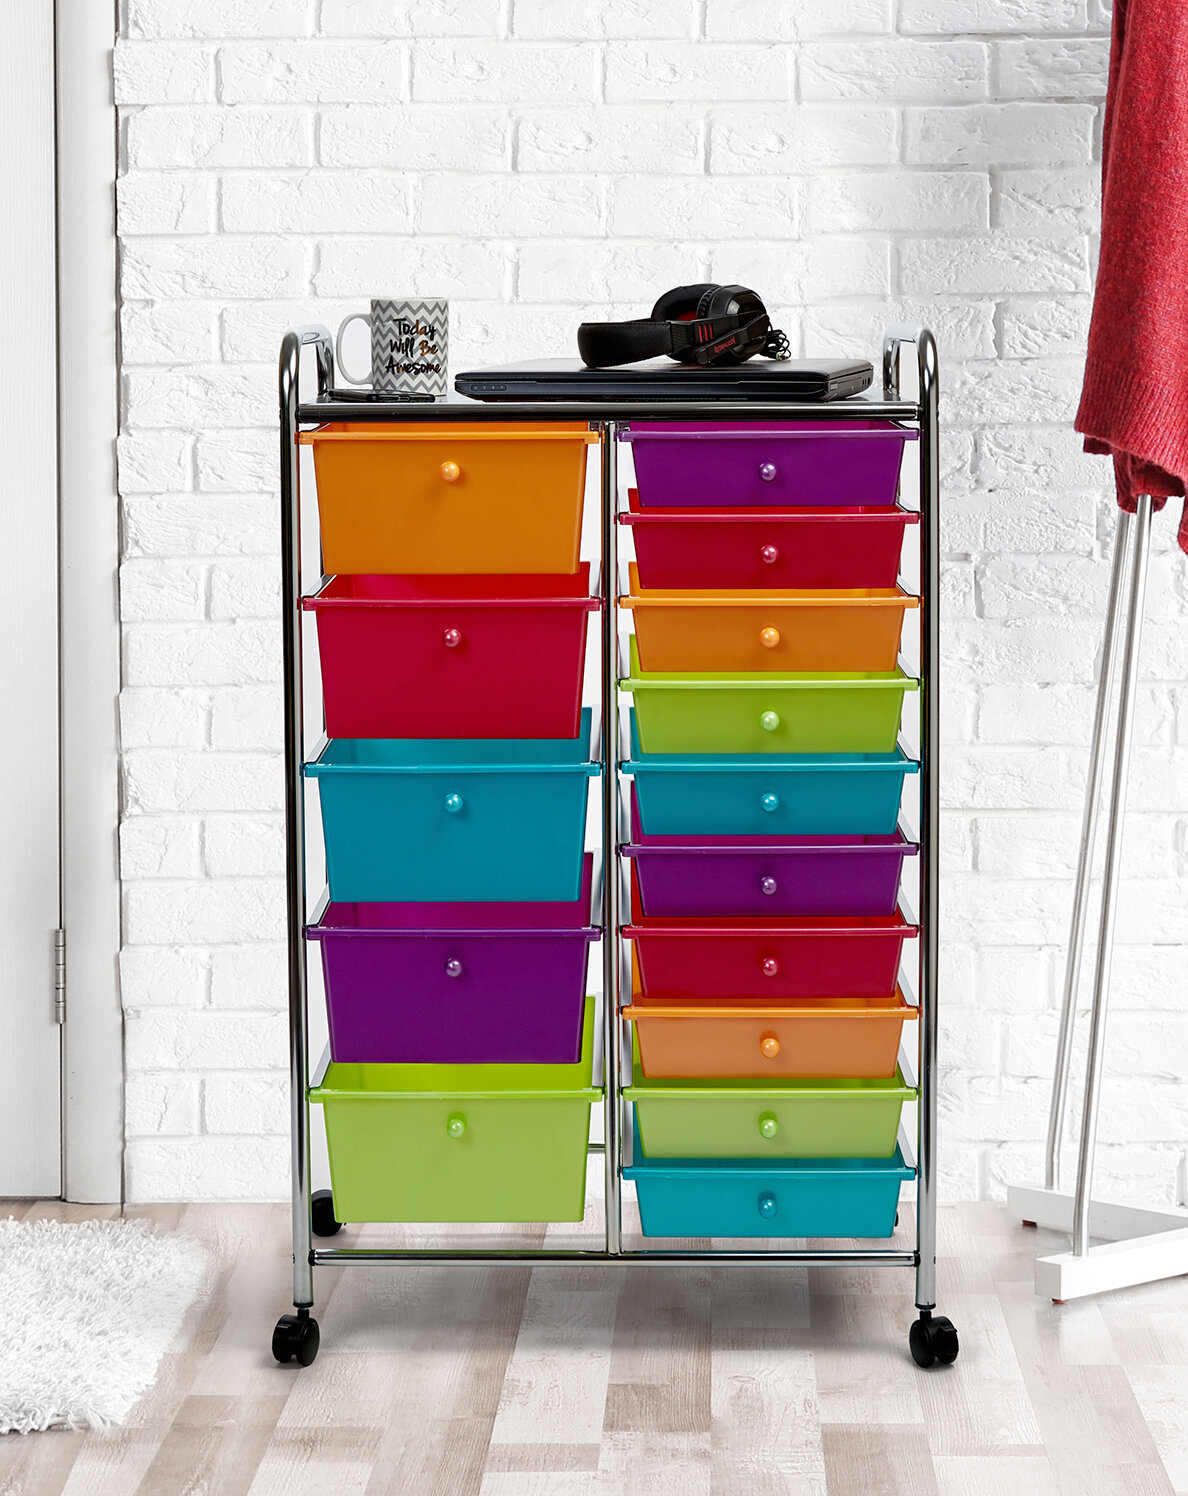 Hoffman 15 Drawer Rolling Storage Chest The Twillery Co. Color: Multicolored